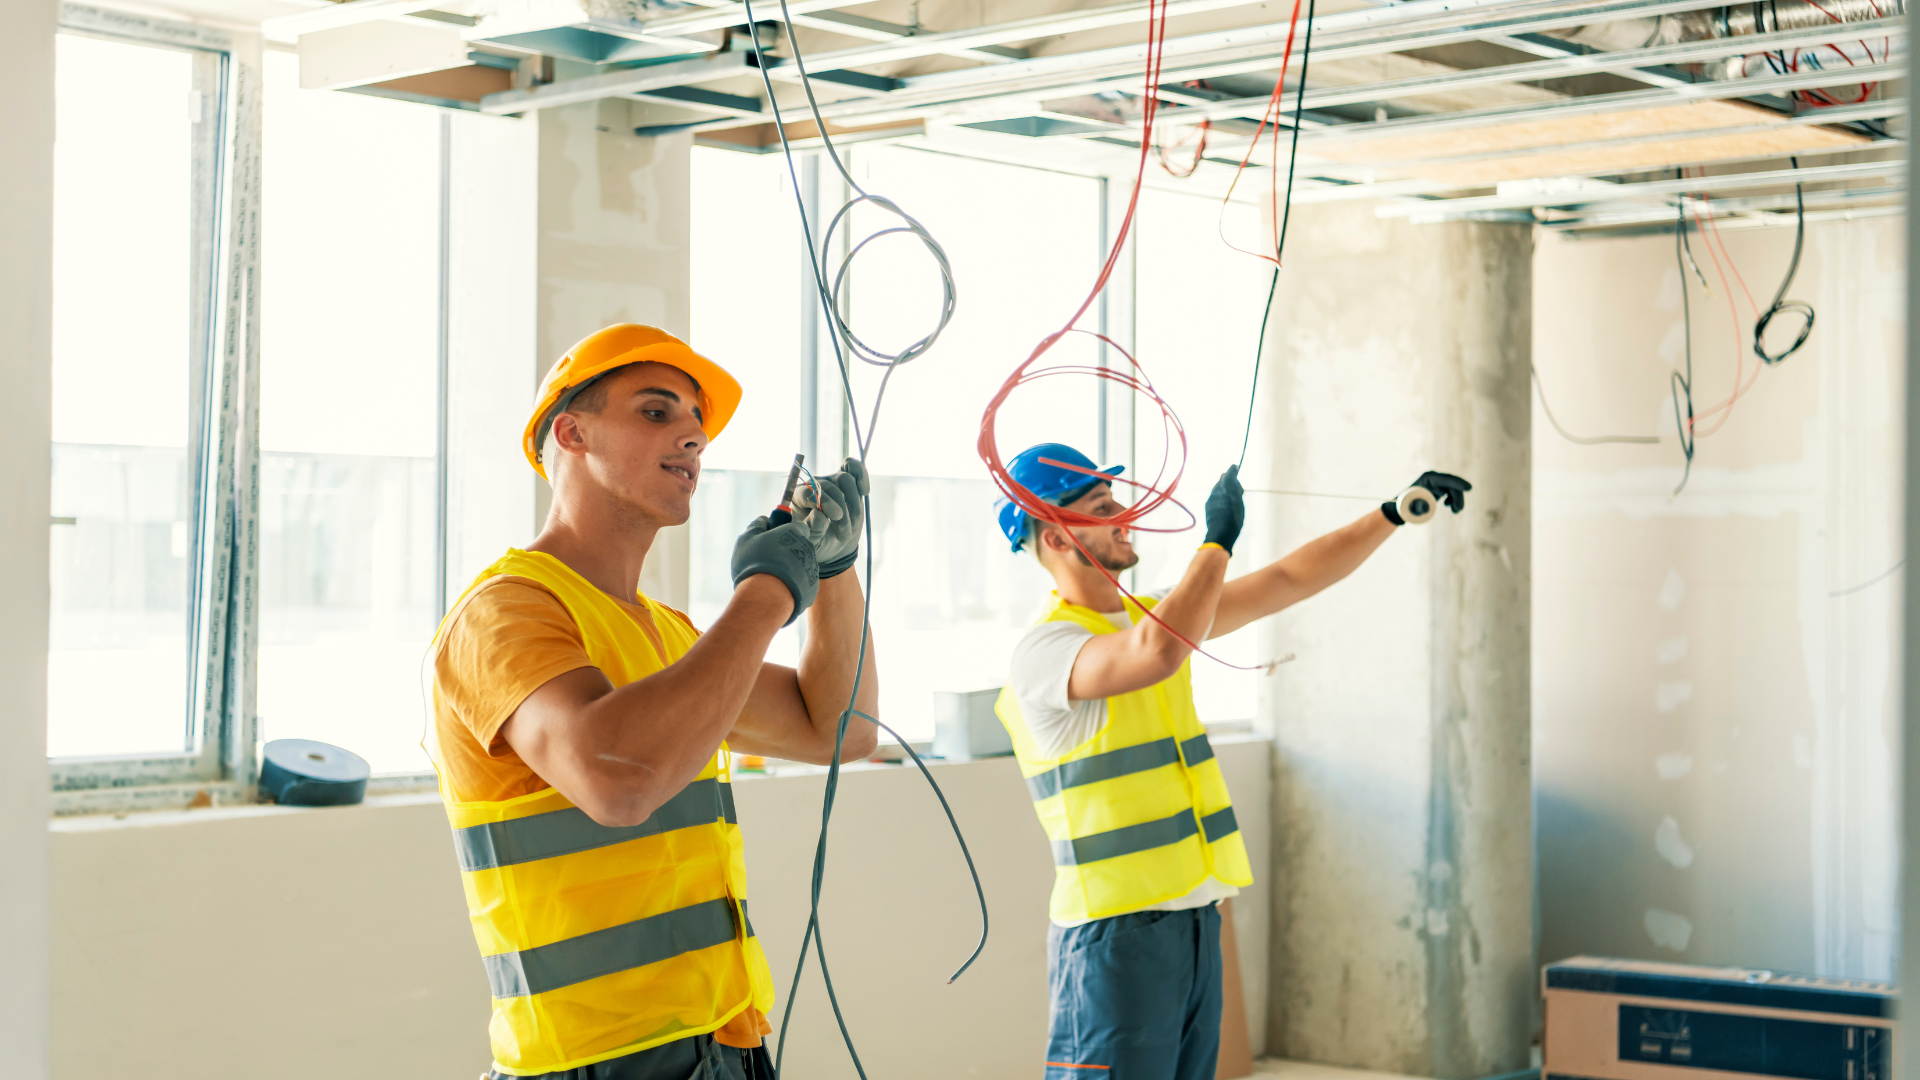 5 Warning Signs You Need to Hire an Electrician Immediately